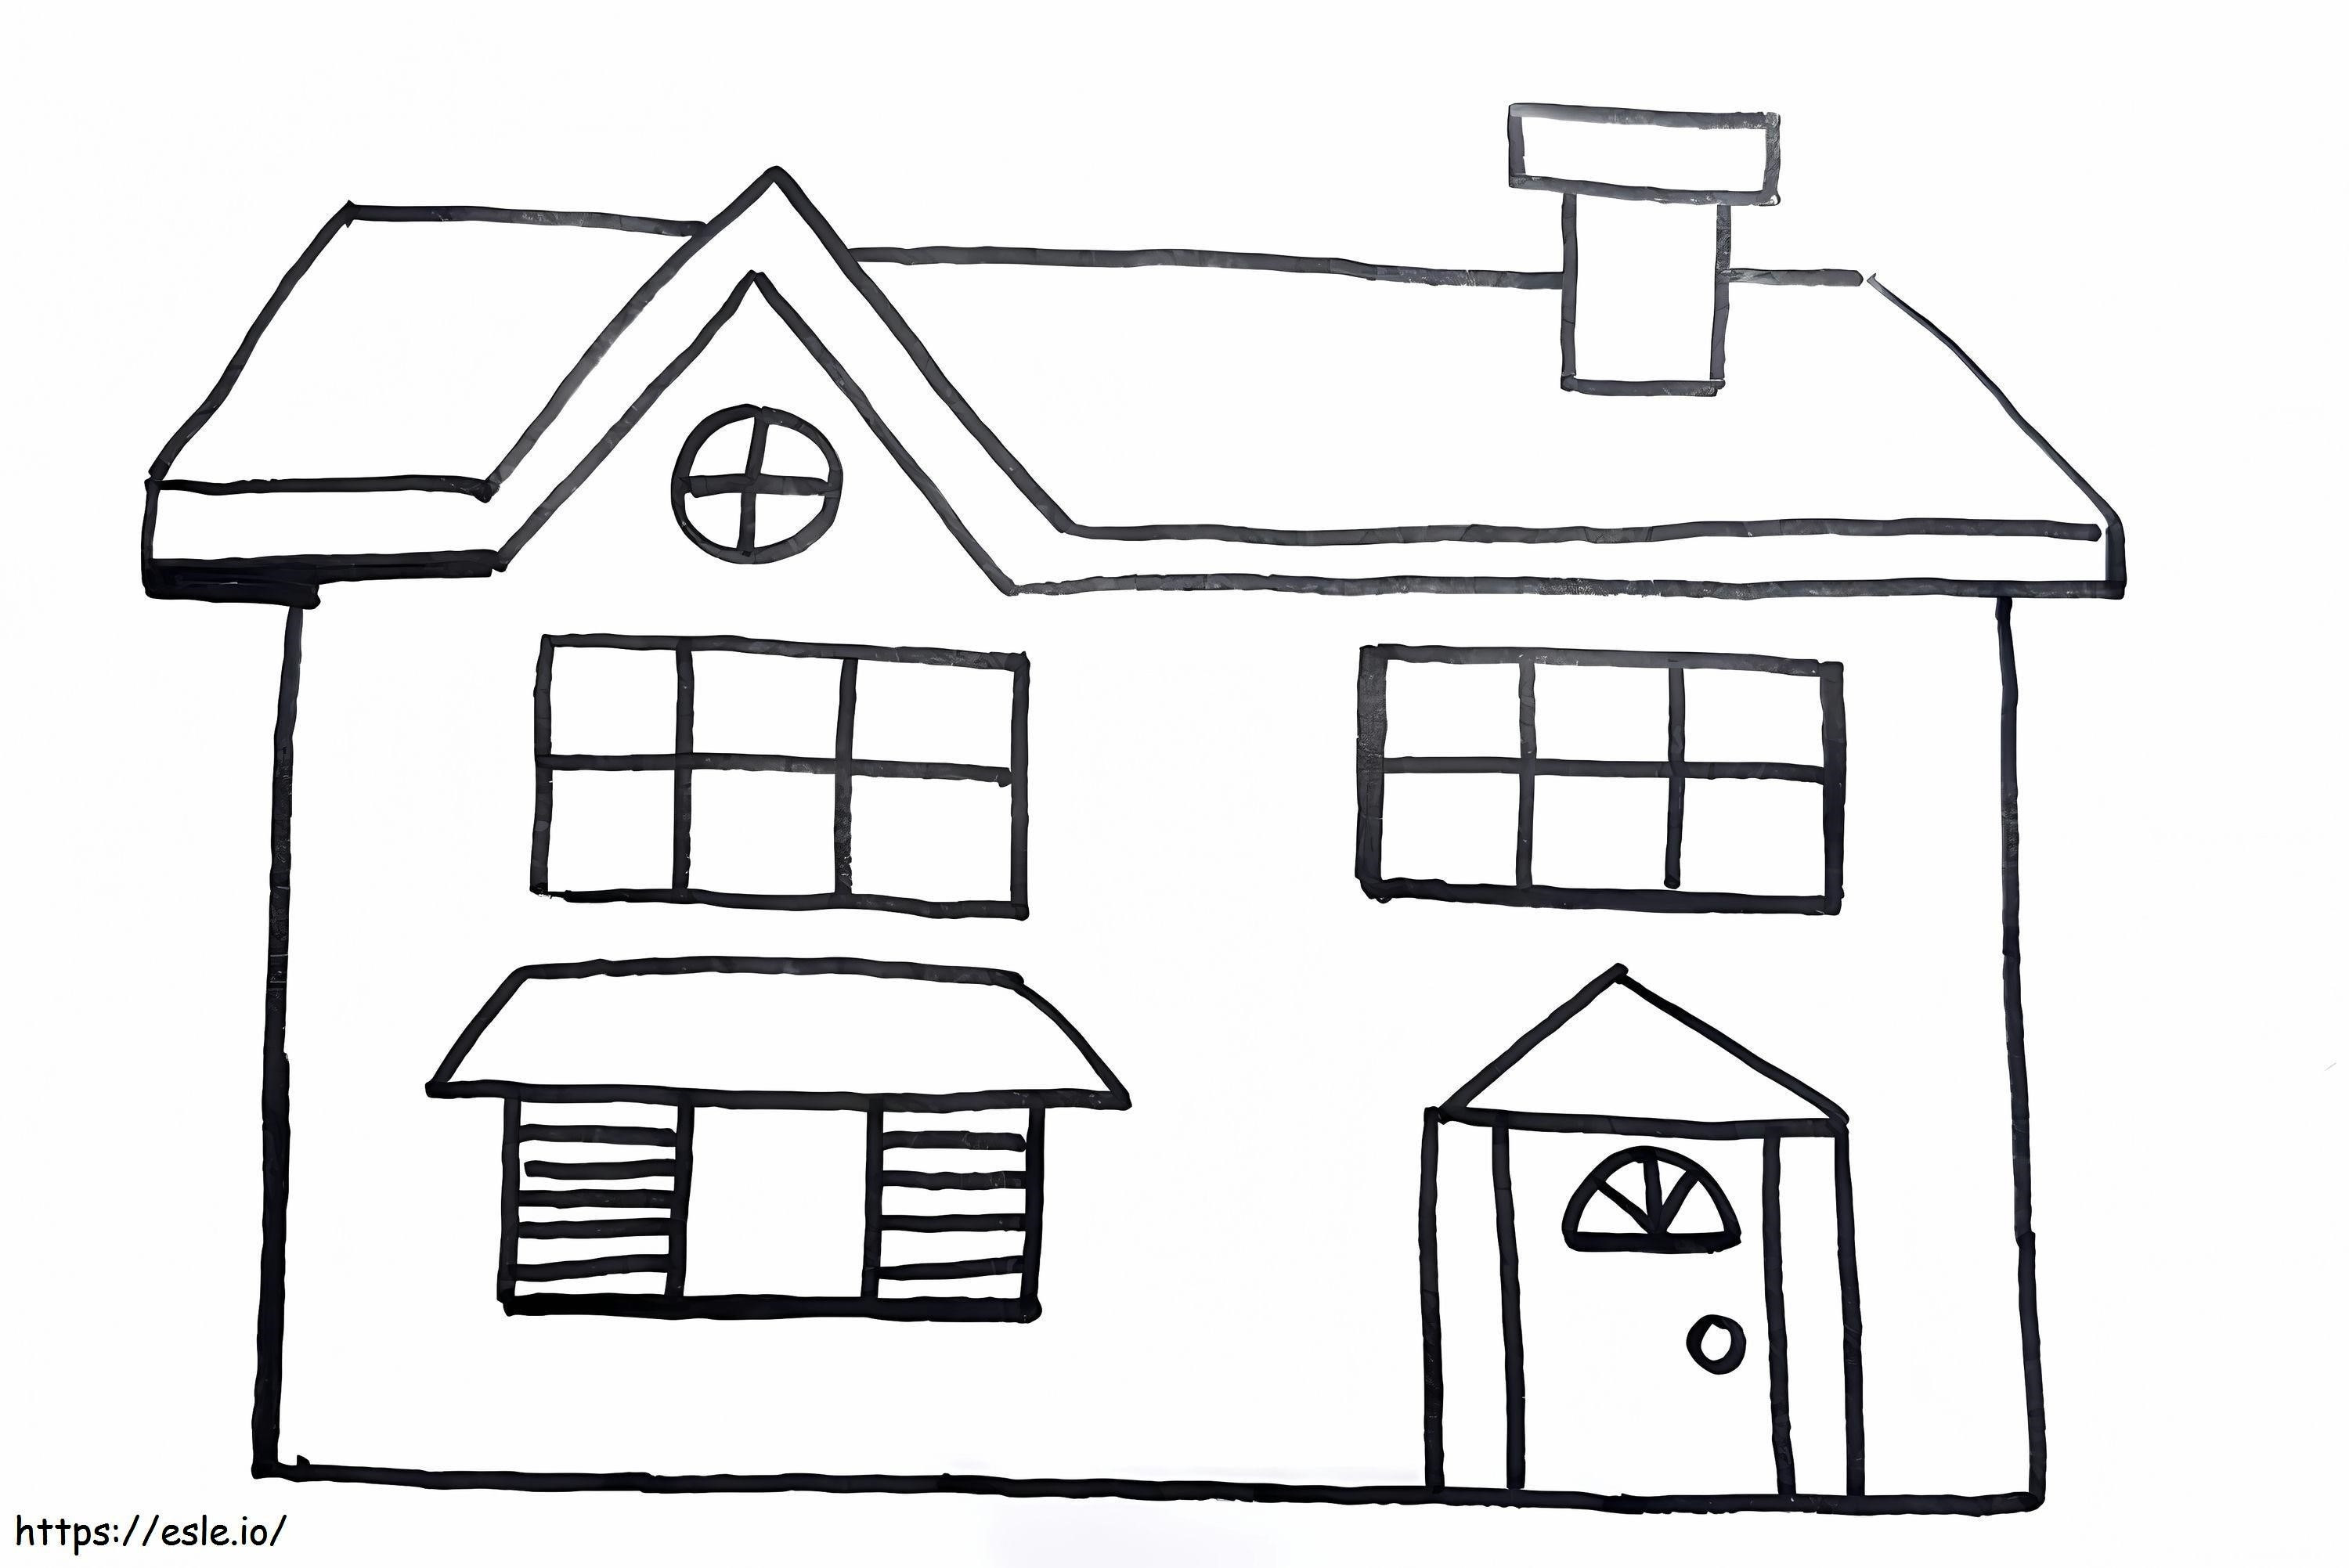 1560928307 A House A4 coloring page